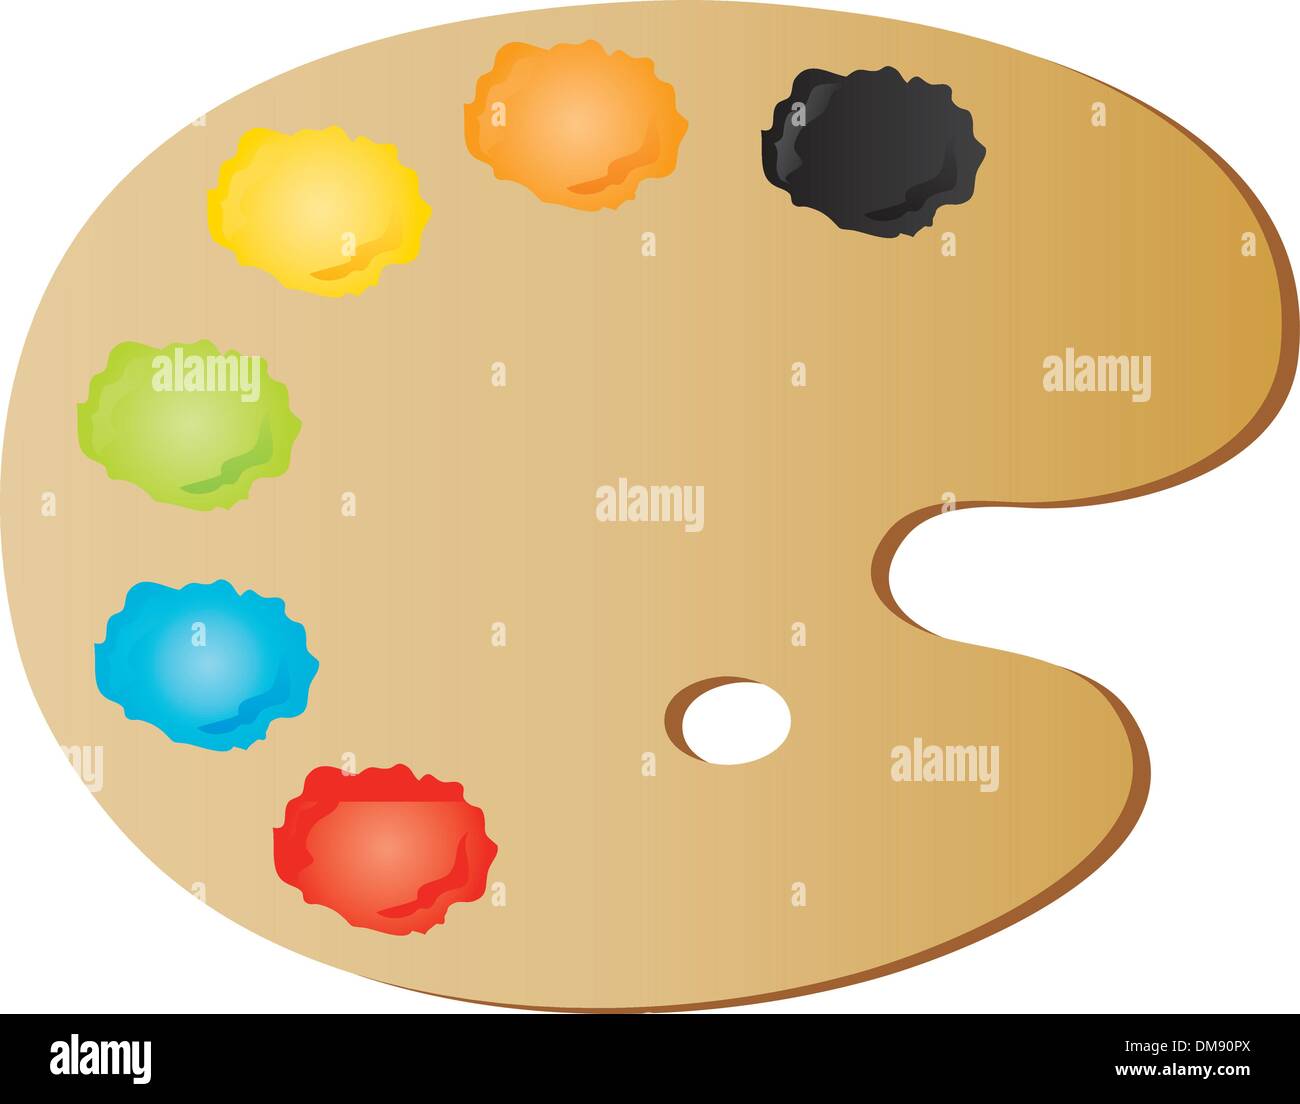 The painters palette Stock Vector Images - Alamy